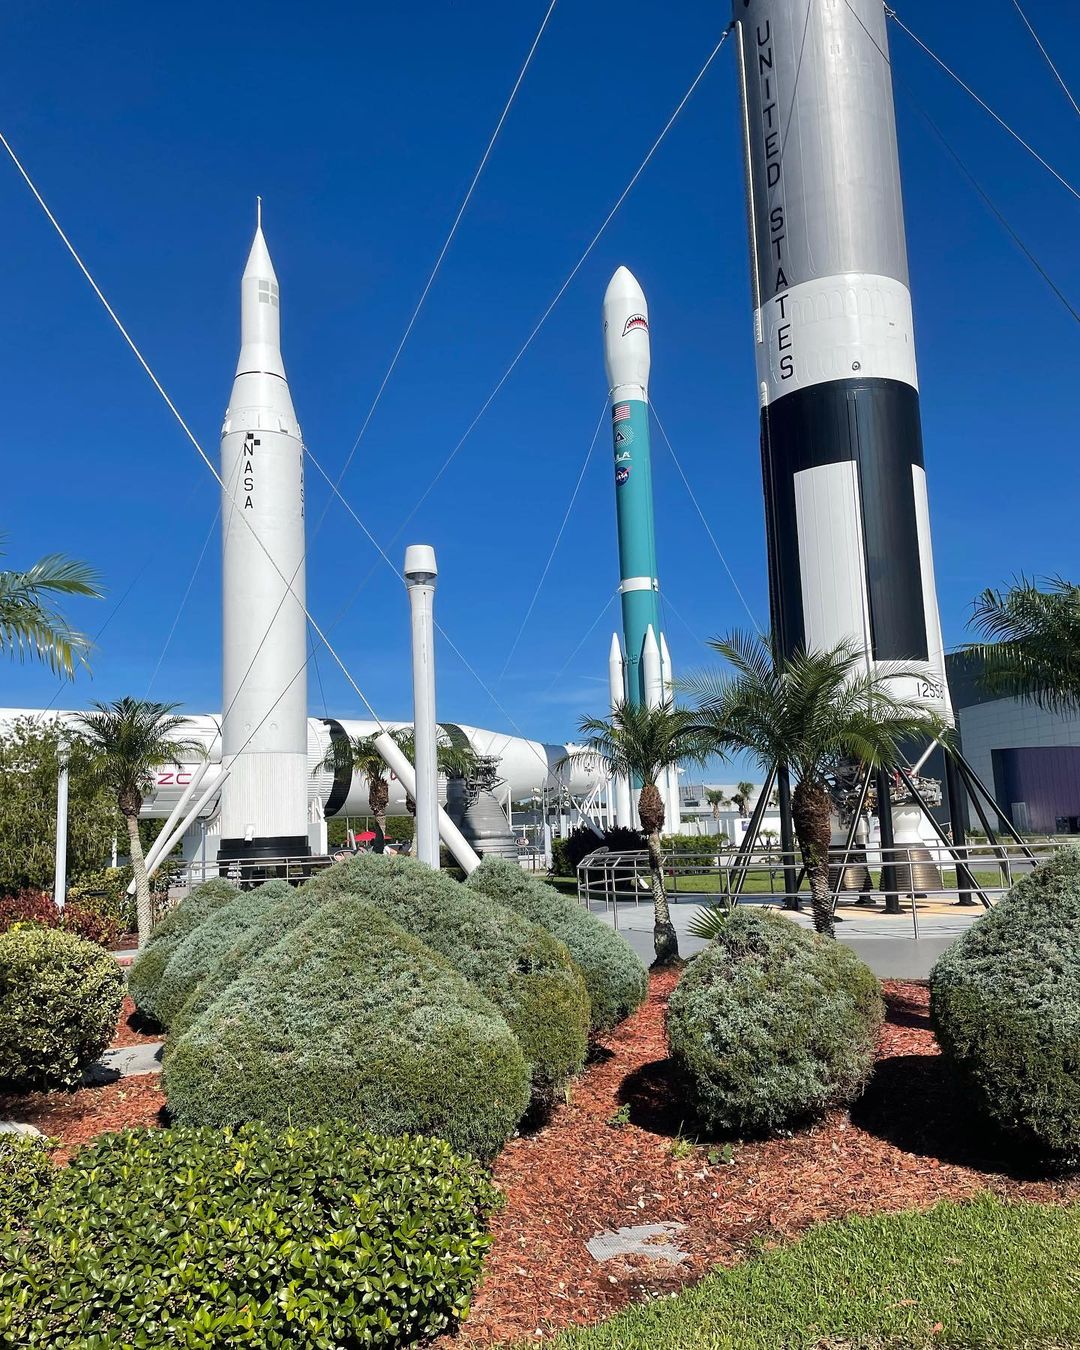 Royal Rockets at Kennedy Space Center